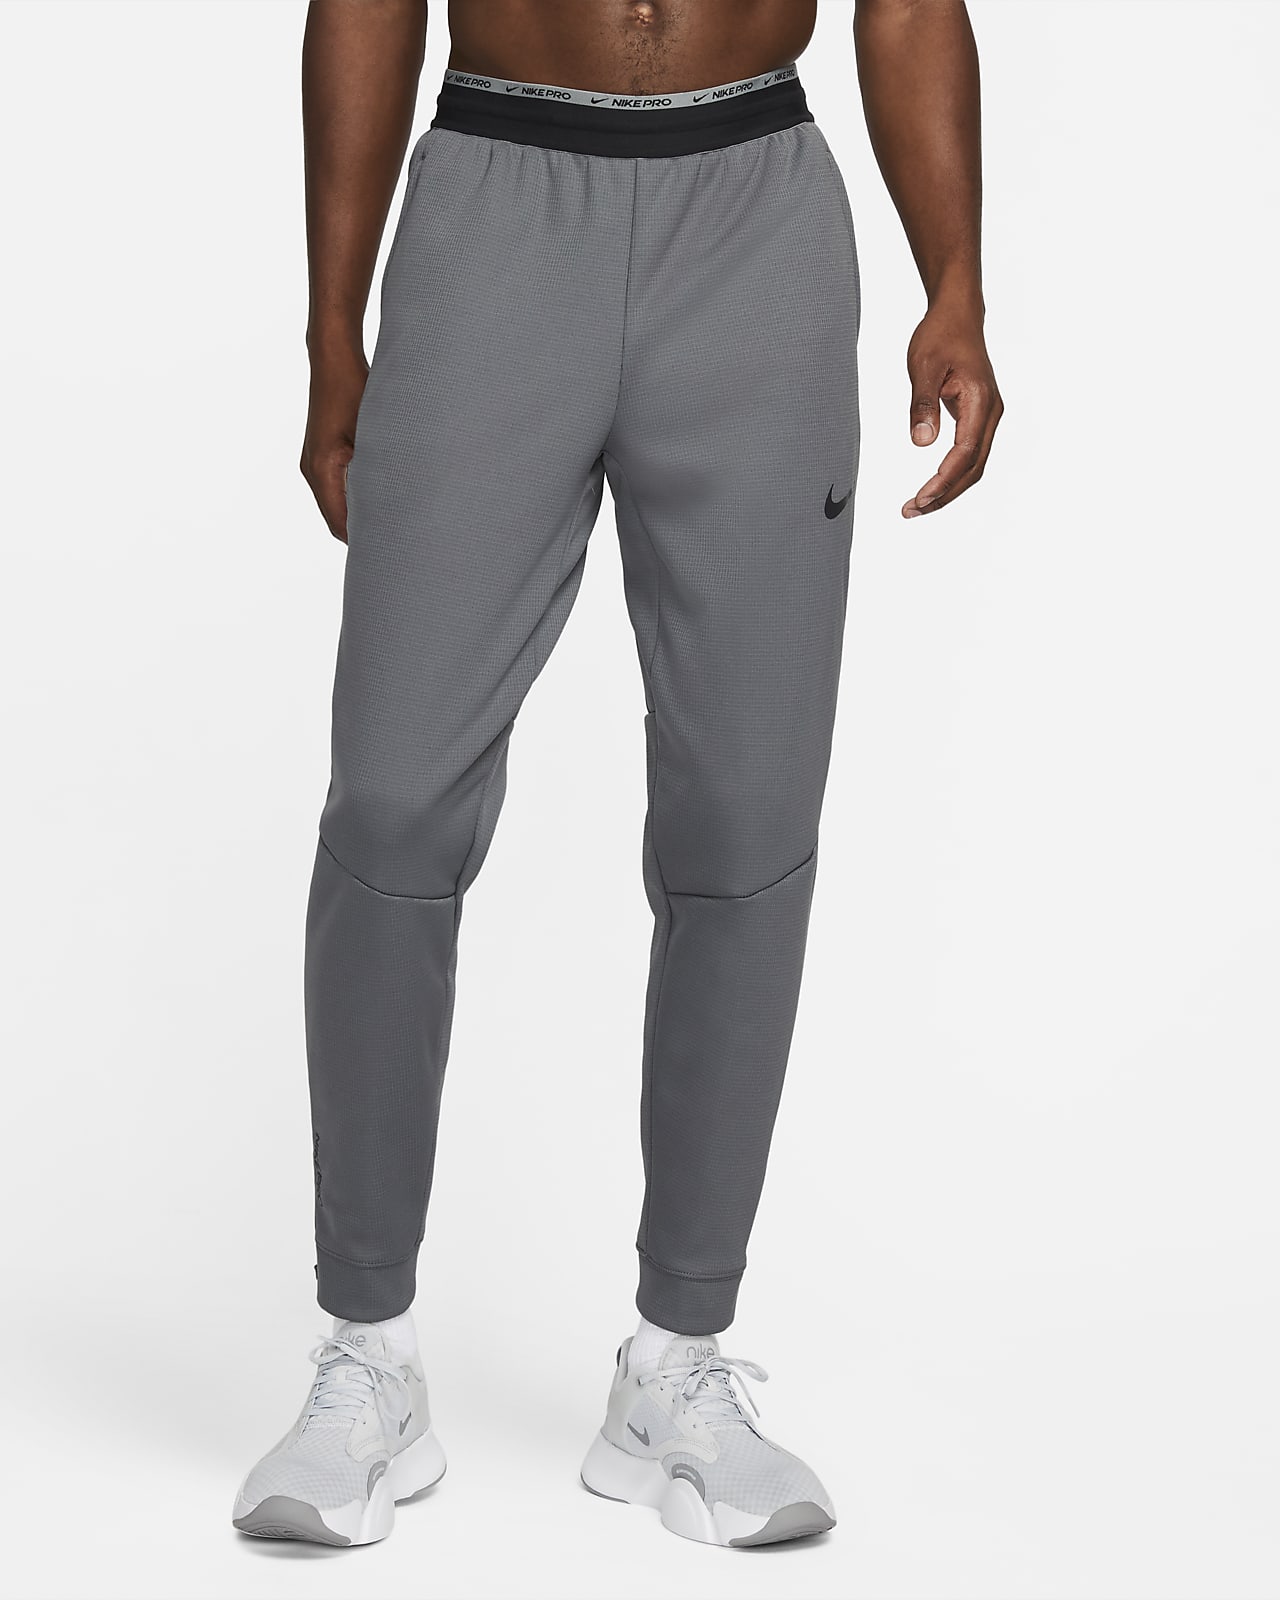 Pants de fitness Therma-FIT para hombre Nike Therma Sphere